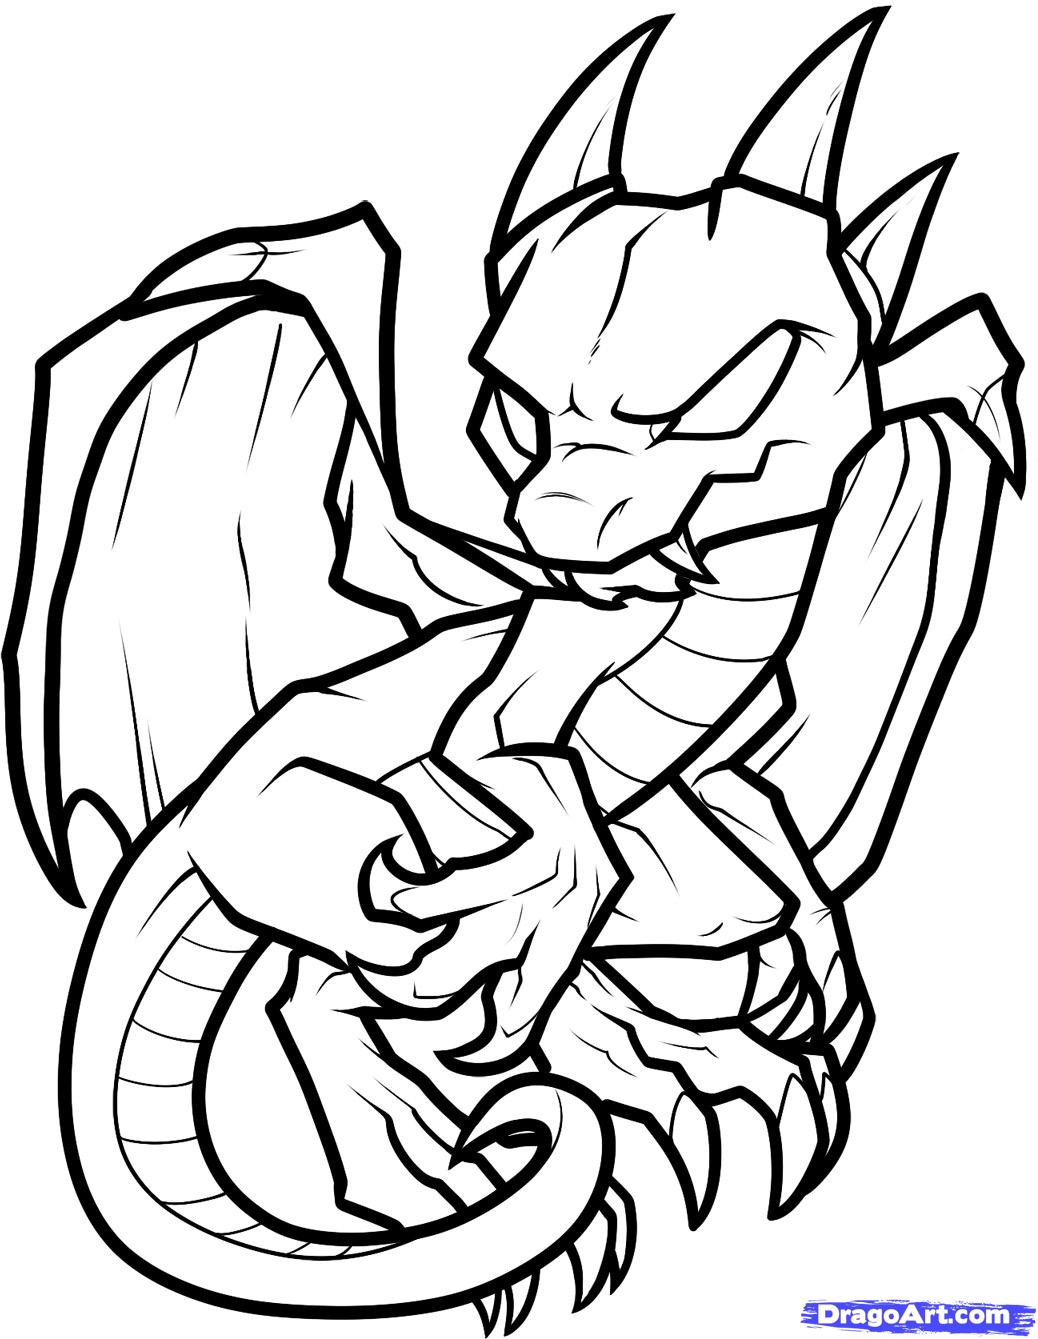 Anime Dragon Chibi Download  Drawing  Free Transparent PNG Clipart Images  Download